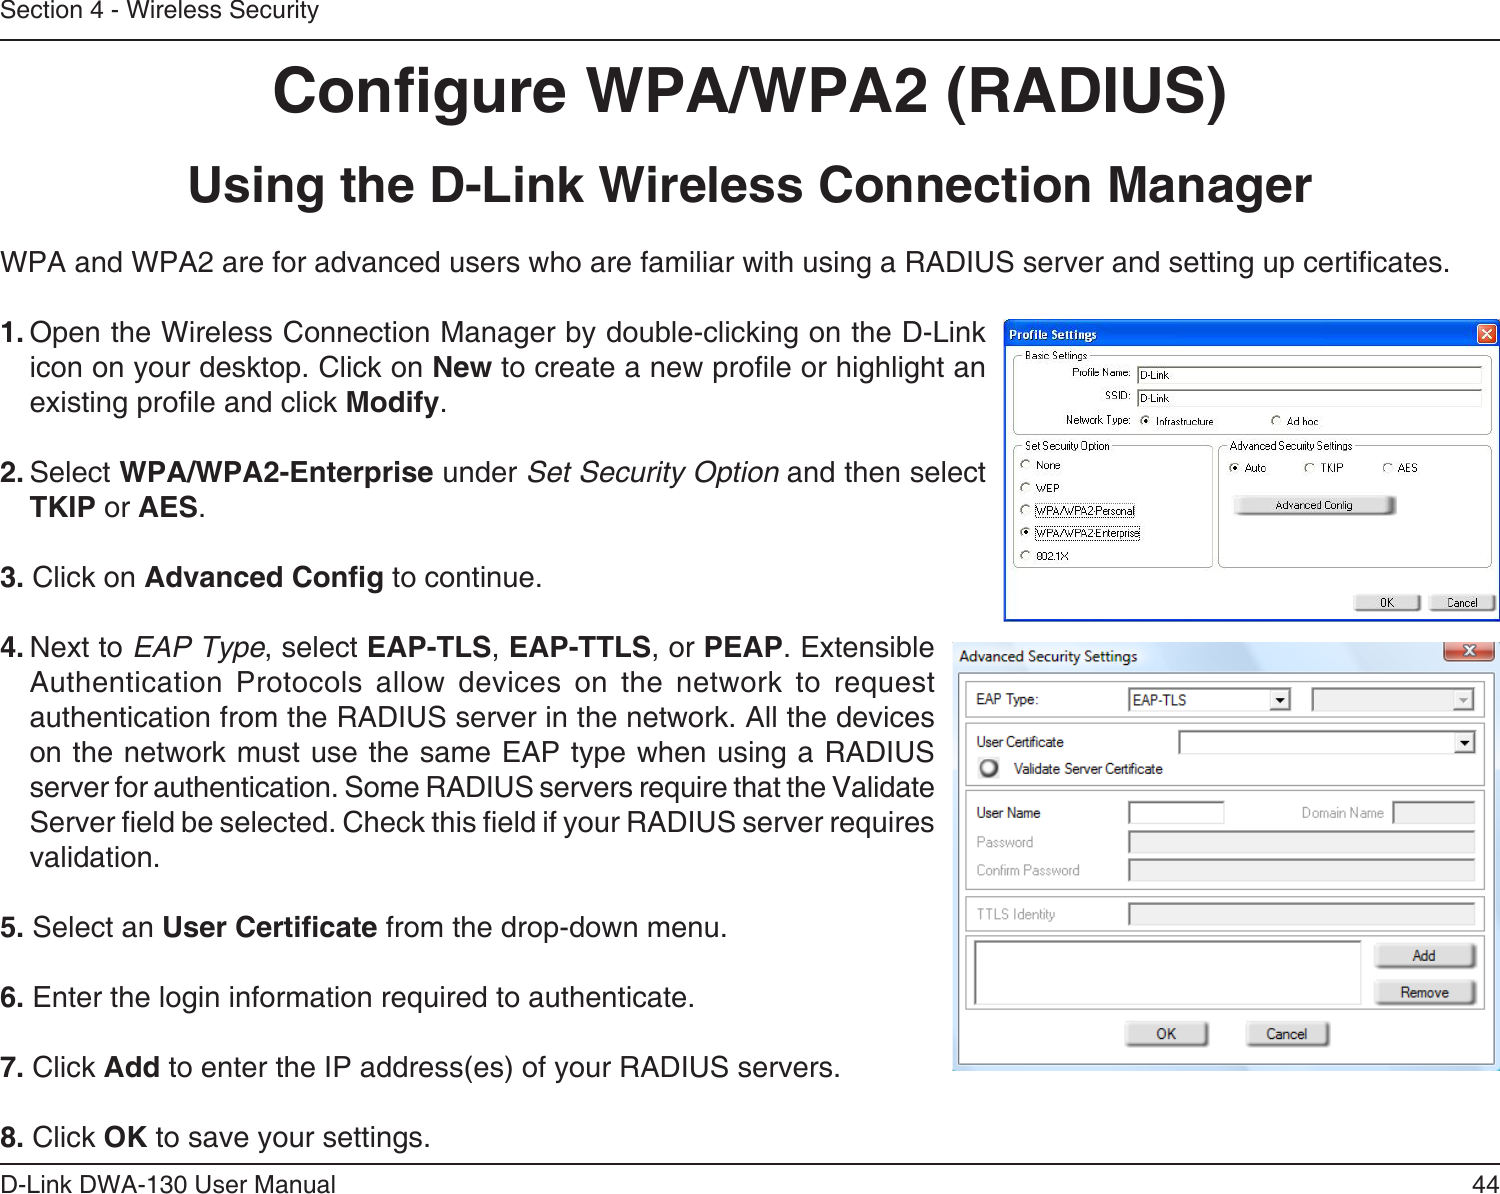 44D-Link DWA-130 User ManualSection 4 - Wireless SecurityCongure WPA/WPA2 (RADIUS)Using the D-Link Wireless Connection ManagerWPA and WPA2 are for advanced users who are familiar with using a RADIUS server and setting up certicates.1. Open the Wireless Connection Manager by double-clicking on the D-Link icon on your desktop. Click on New to create a new prole or highlight an existing prole and click Modify. 2. Select WPA/WPA2-Enterprise under Set Security Option and then select TKIP or AES.3. Click on Advanced Cong to continue.4. Next to EAP Type, select EAP-TLS, EAP-TTLS, or PEAP. Extensible Authentication  Protocols  allow  devices  on  the  network  to  request authentication from the RADIUS server in the network. All the devices on the network must use the same EAP type when using a RADIUS server for authentication. Some RADIUS servers require that the Validate Server eld be selected. Check this eld if your RADIUS server requires validation.5. Select an User Certicate from the drop-down menu.6. Enter the login information required to authenticate.7. Click Add to enter the IP address(es) of your RADIUS servers.8. Click OK to save your settings.